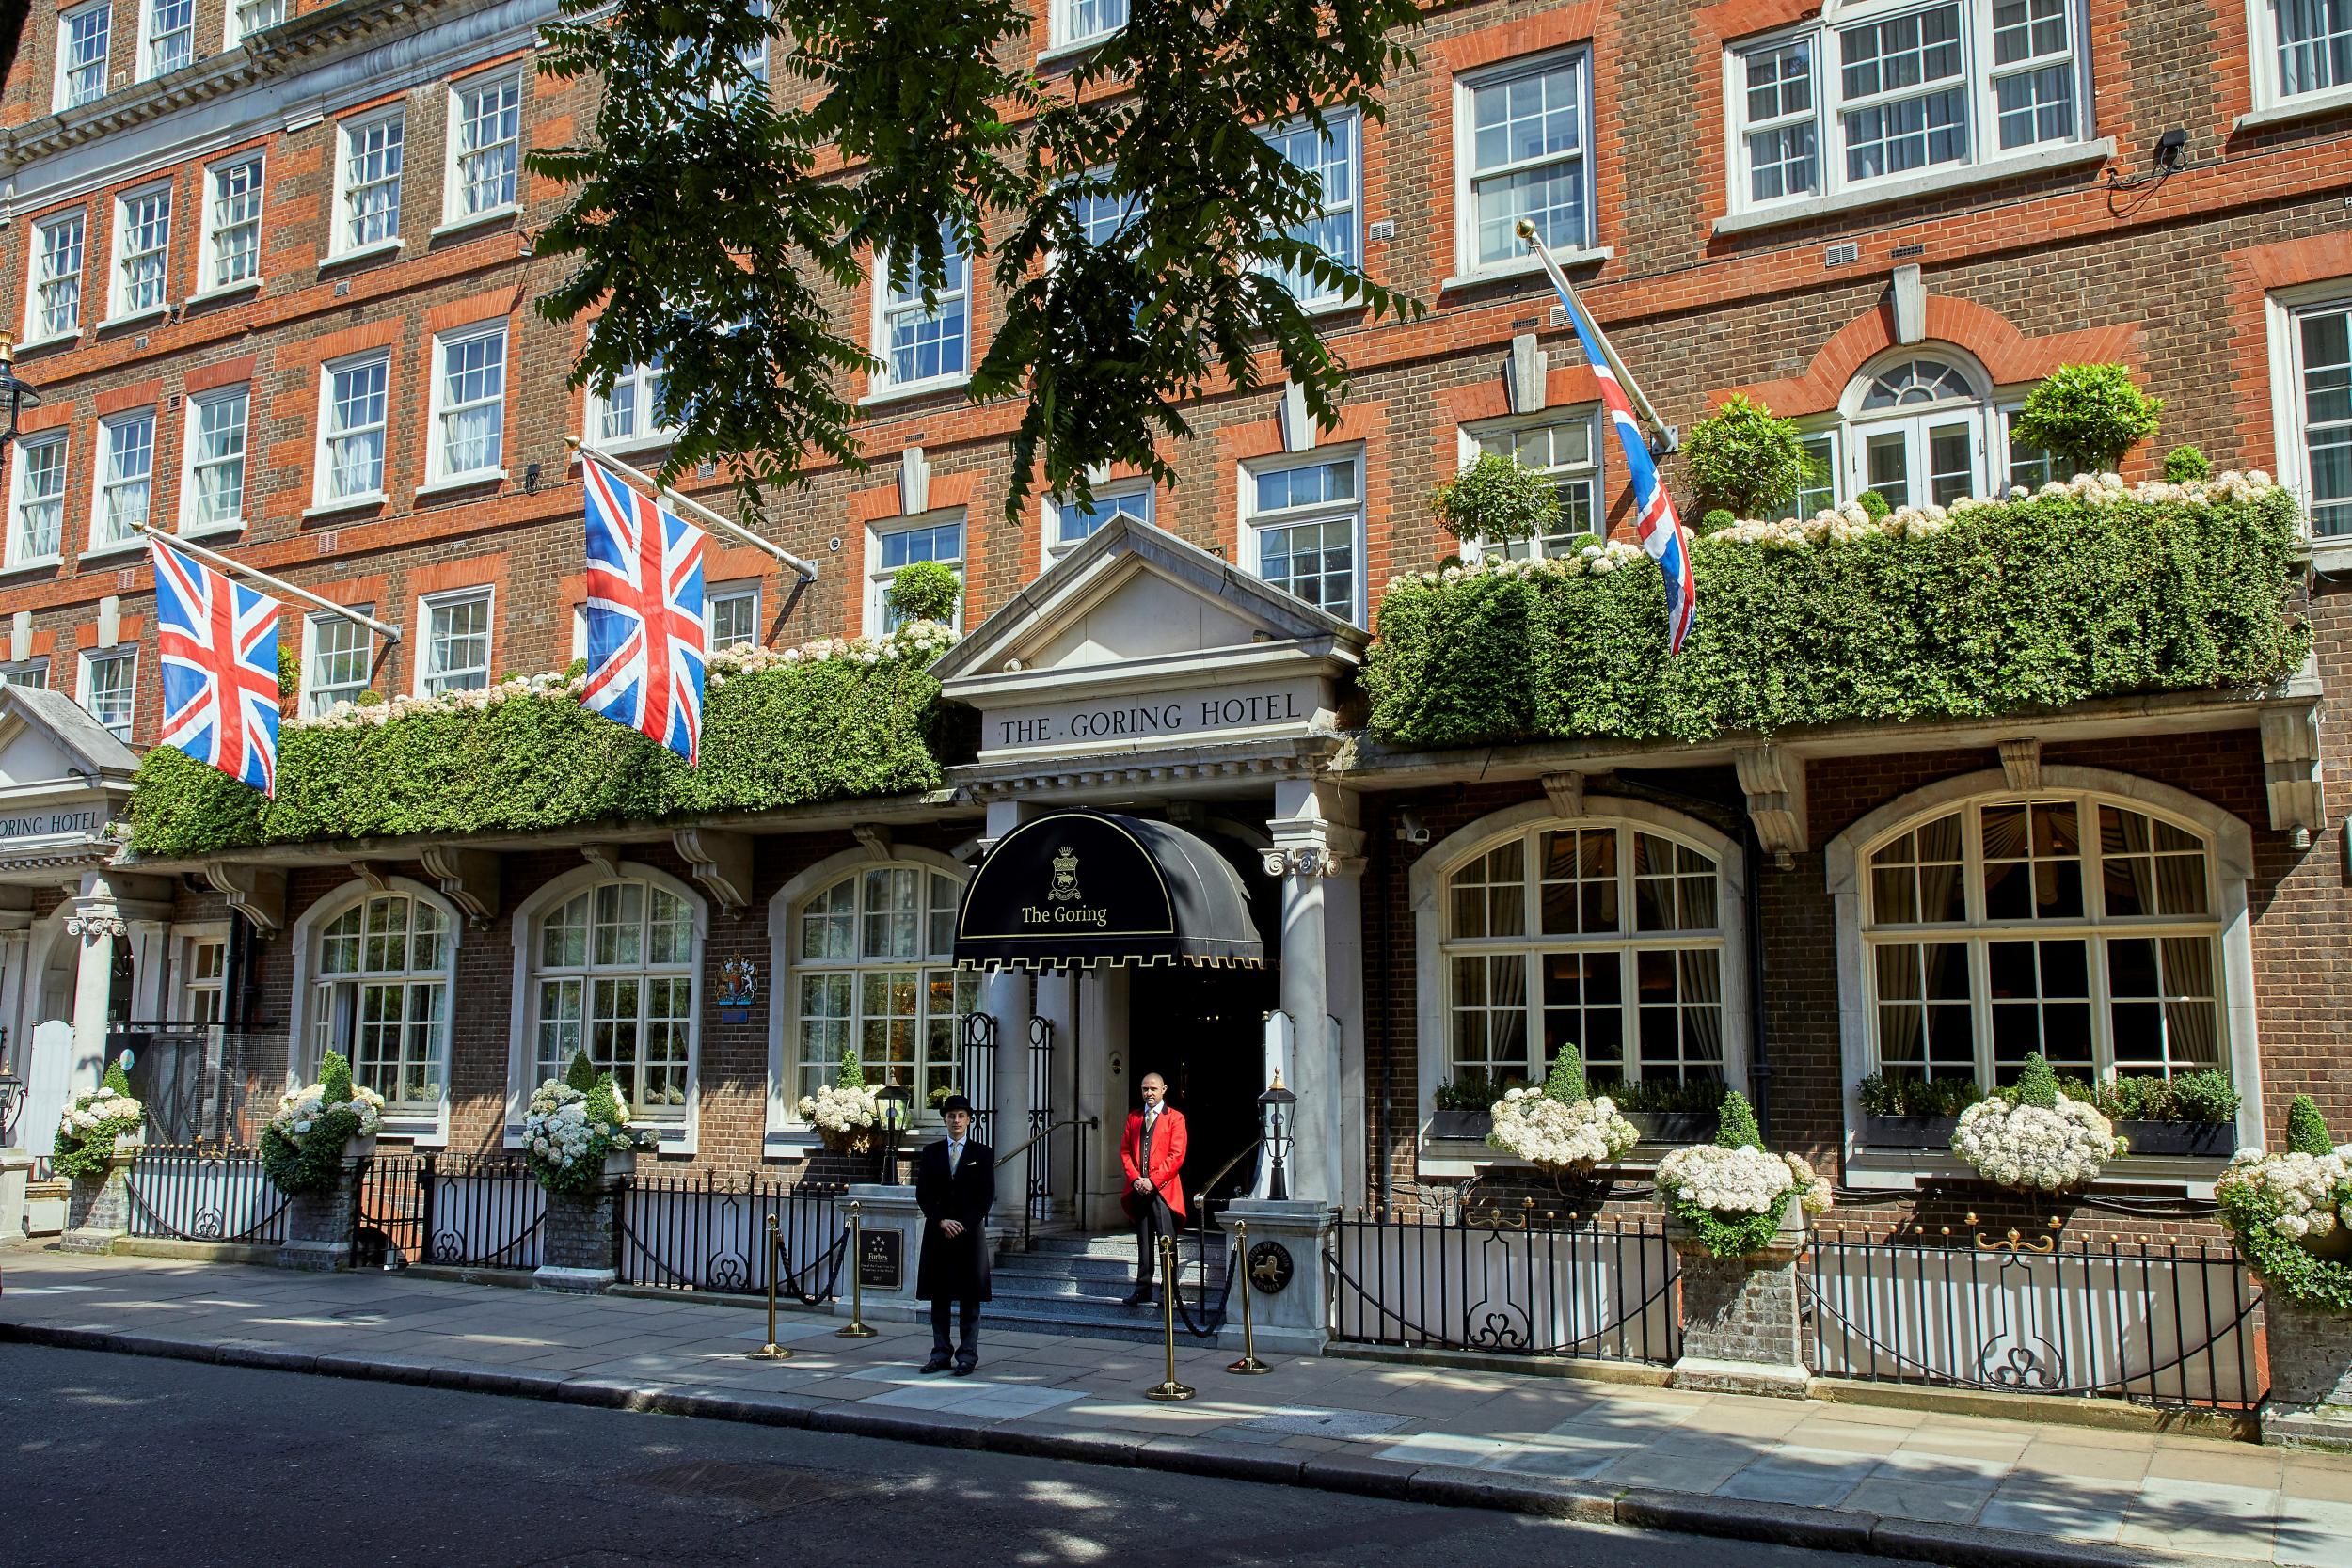 The Goring is a "baby grand" hotel in the centre of London